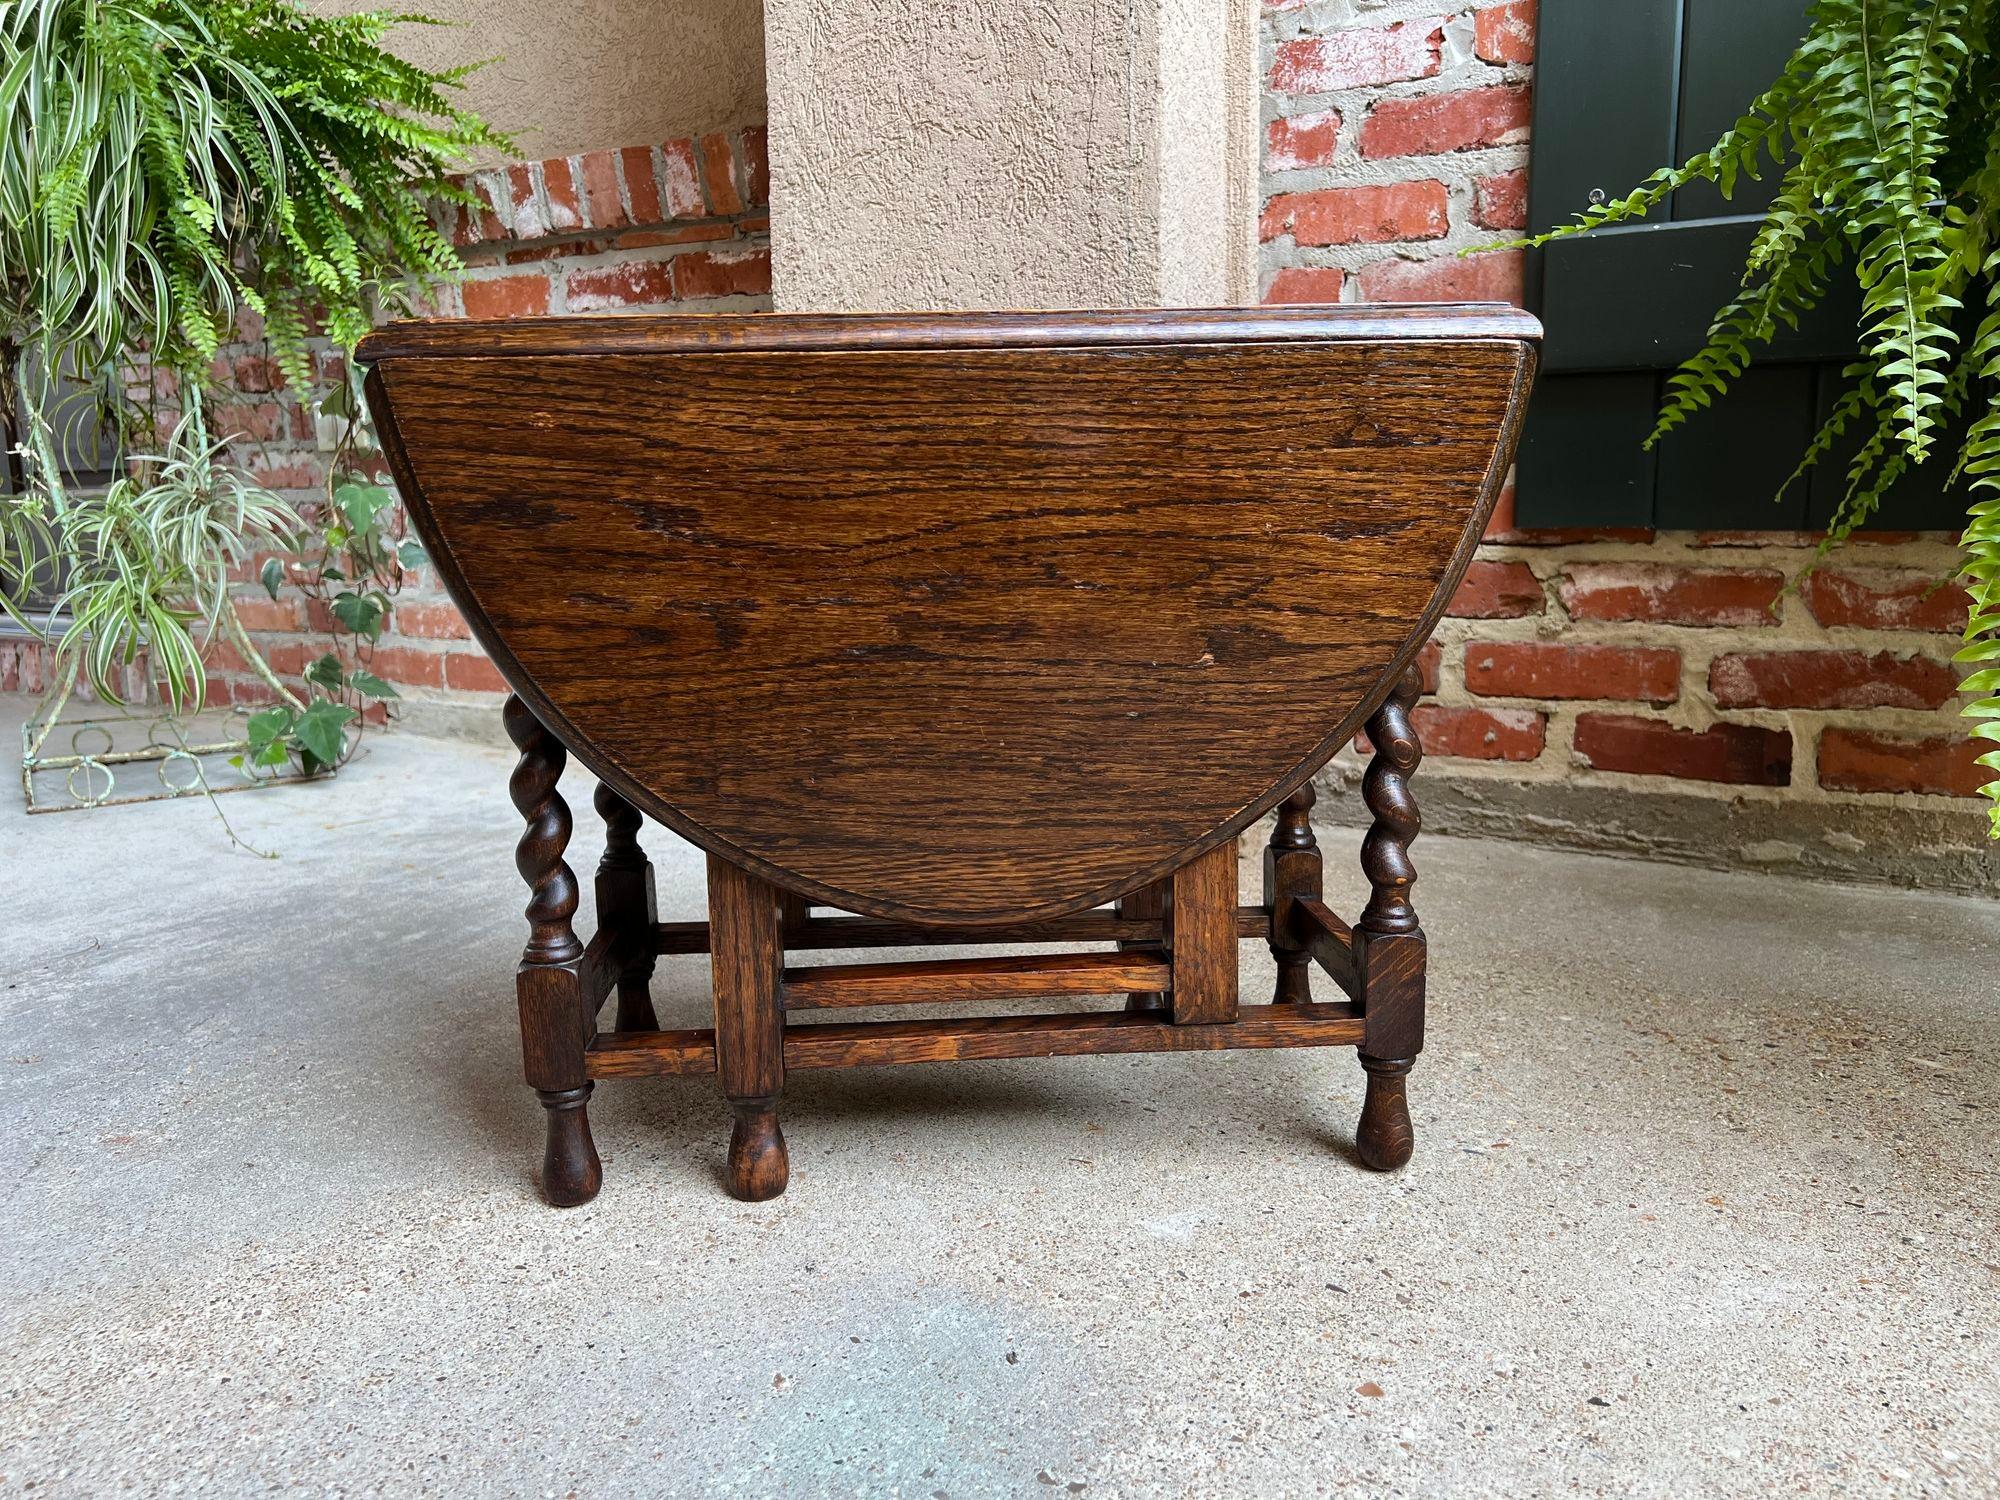 Antique English Drop Leaf Tea Table Barley Twist PETITE Dark Oak Coffee Gate Leg.

Direct from England, (YES, our English container finally arrived, and we have some amazing English antiques, and of course, lots of barley twist)!
This is a